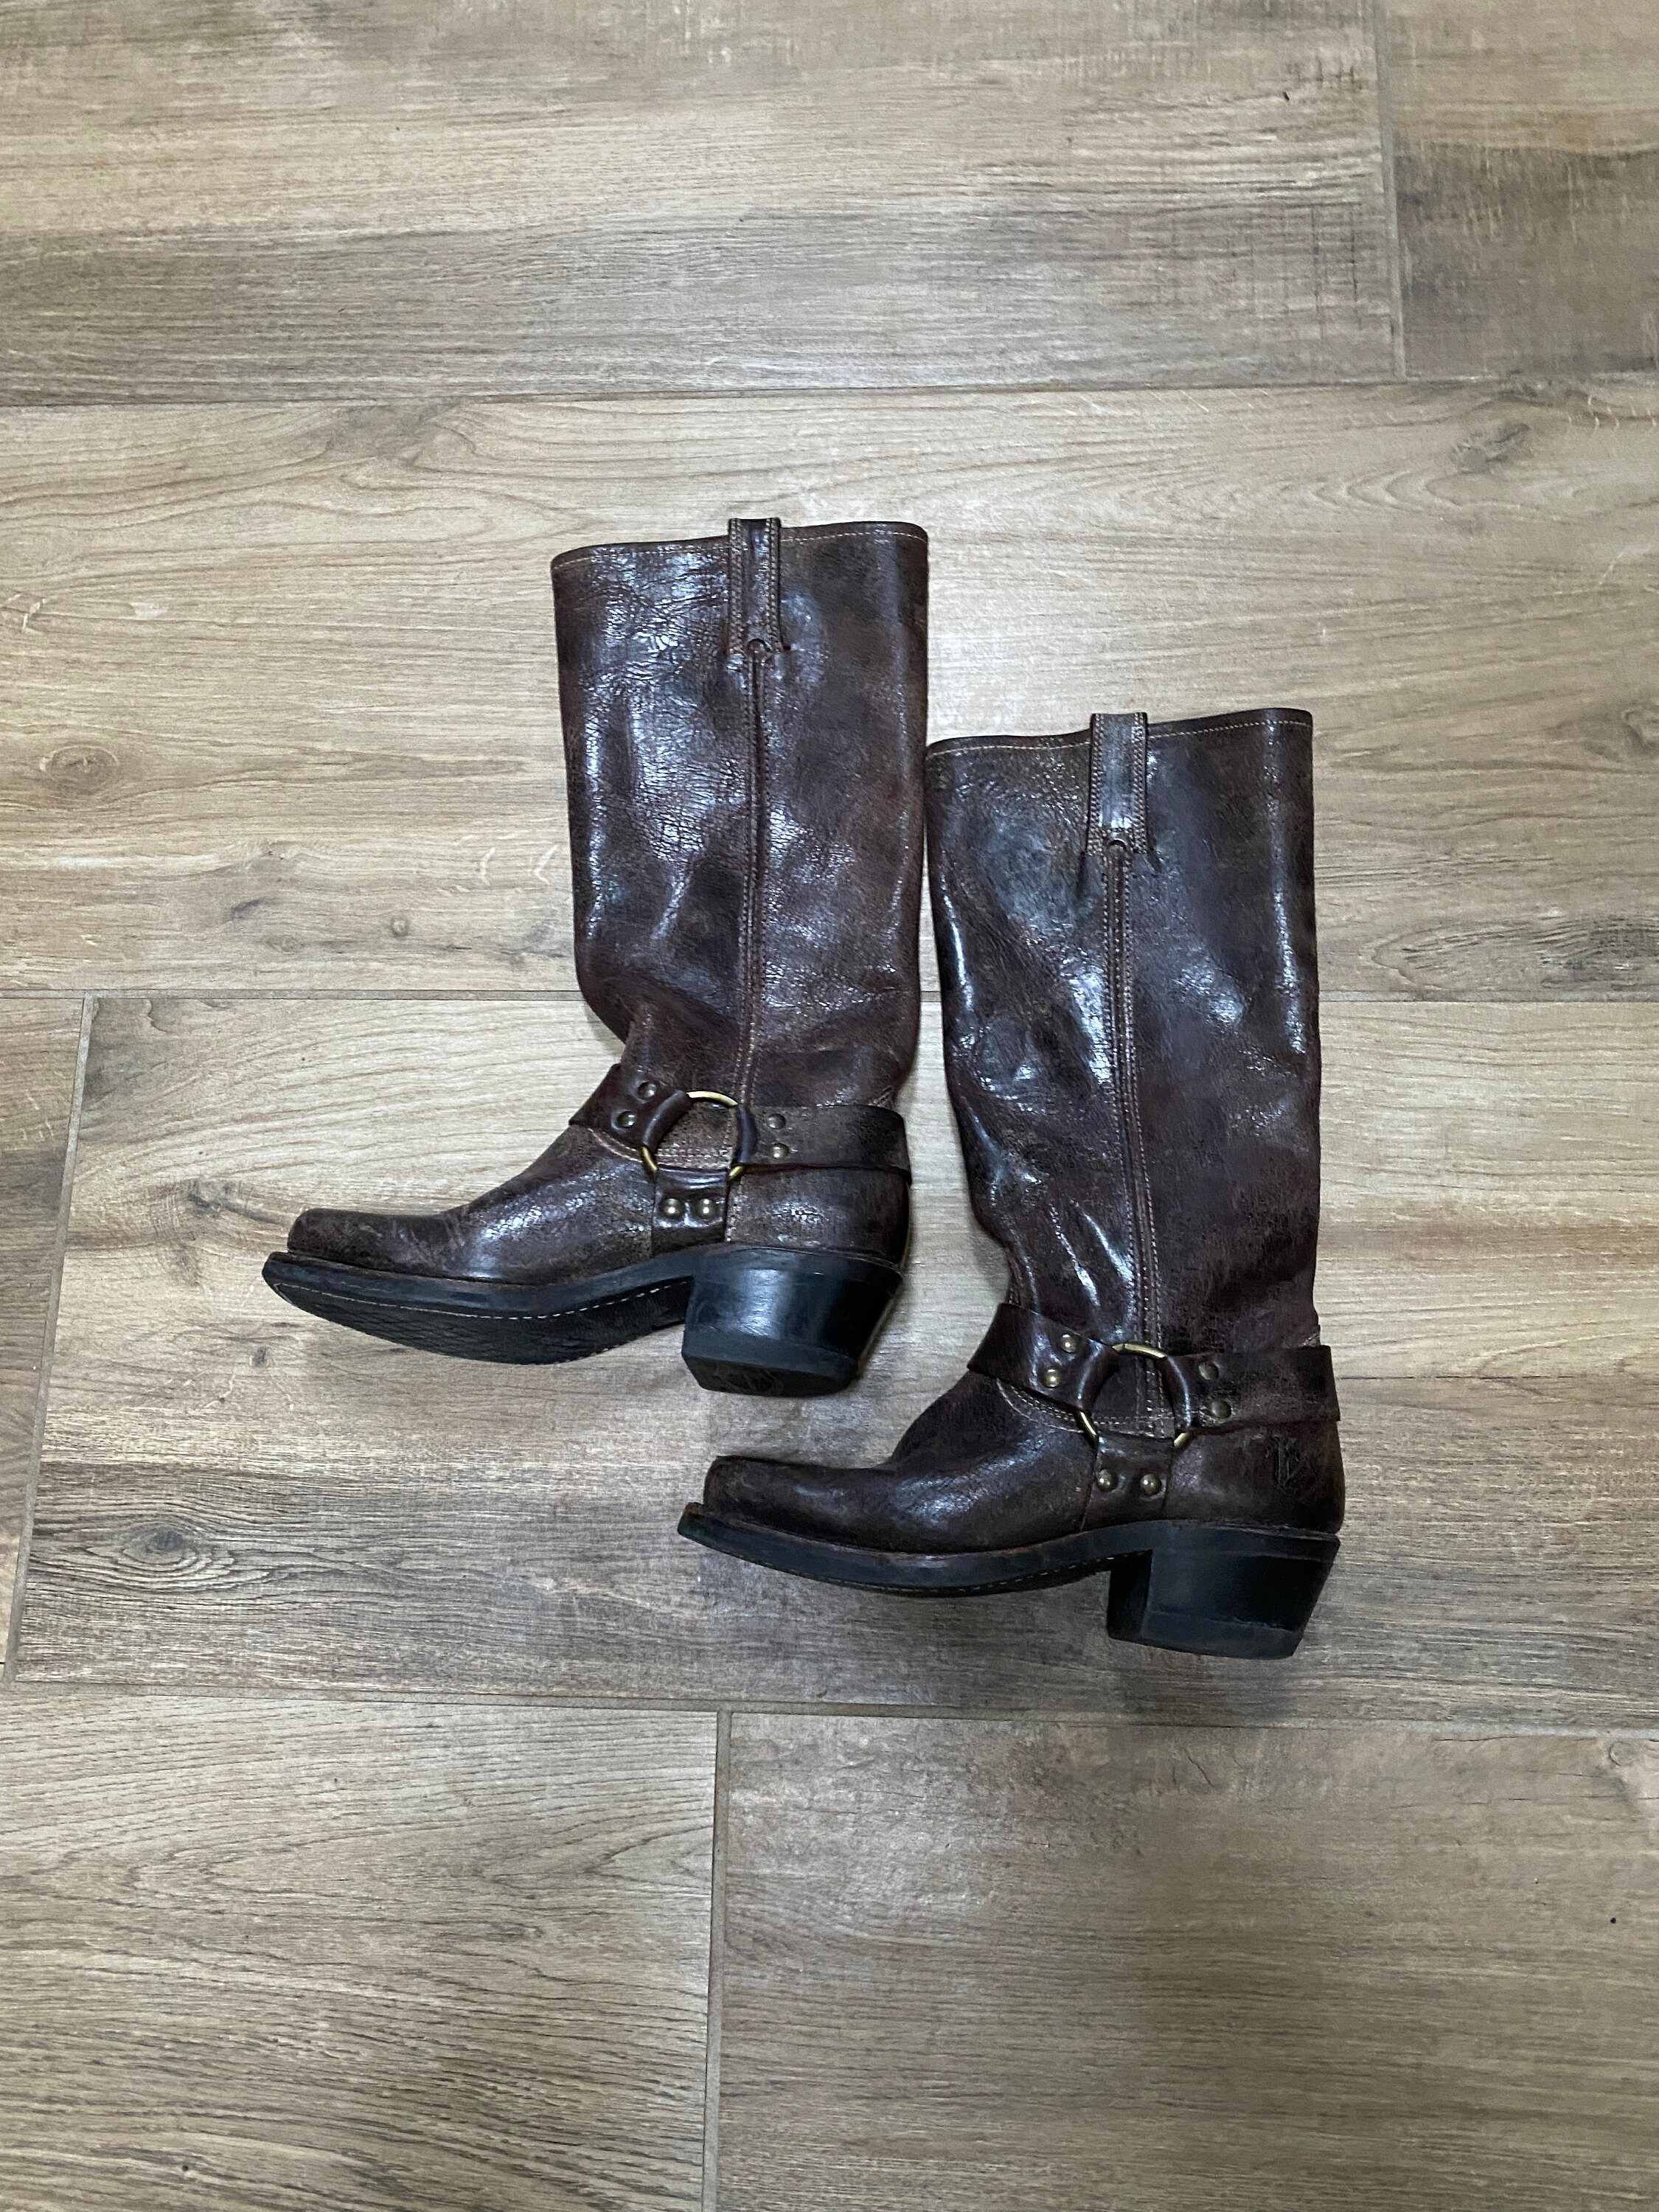 Tall Boots Size 8 Vintage 70s Tall Black Leather Retro Boots Sz. 8 –  FIREGYPSY VINTAGE